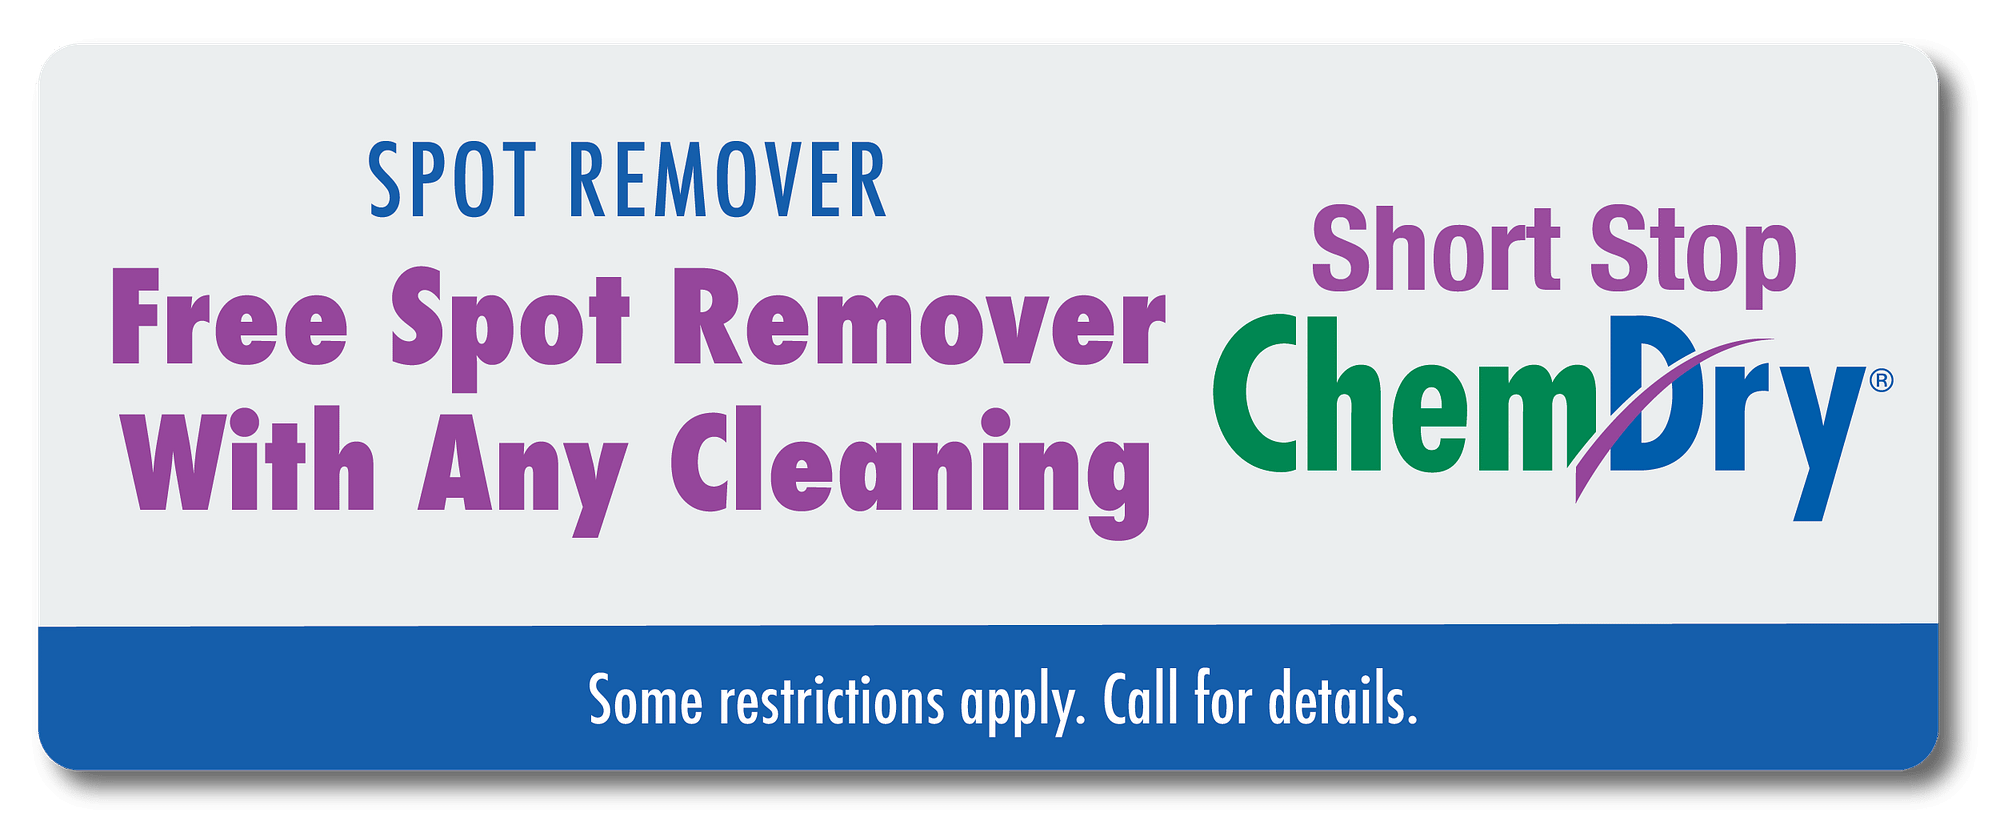 free spot remover with carpet cleaning coupon 